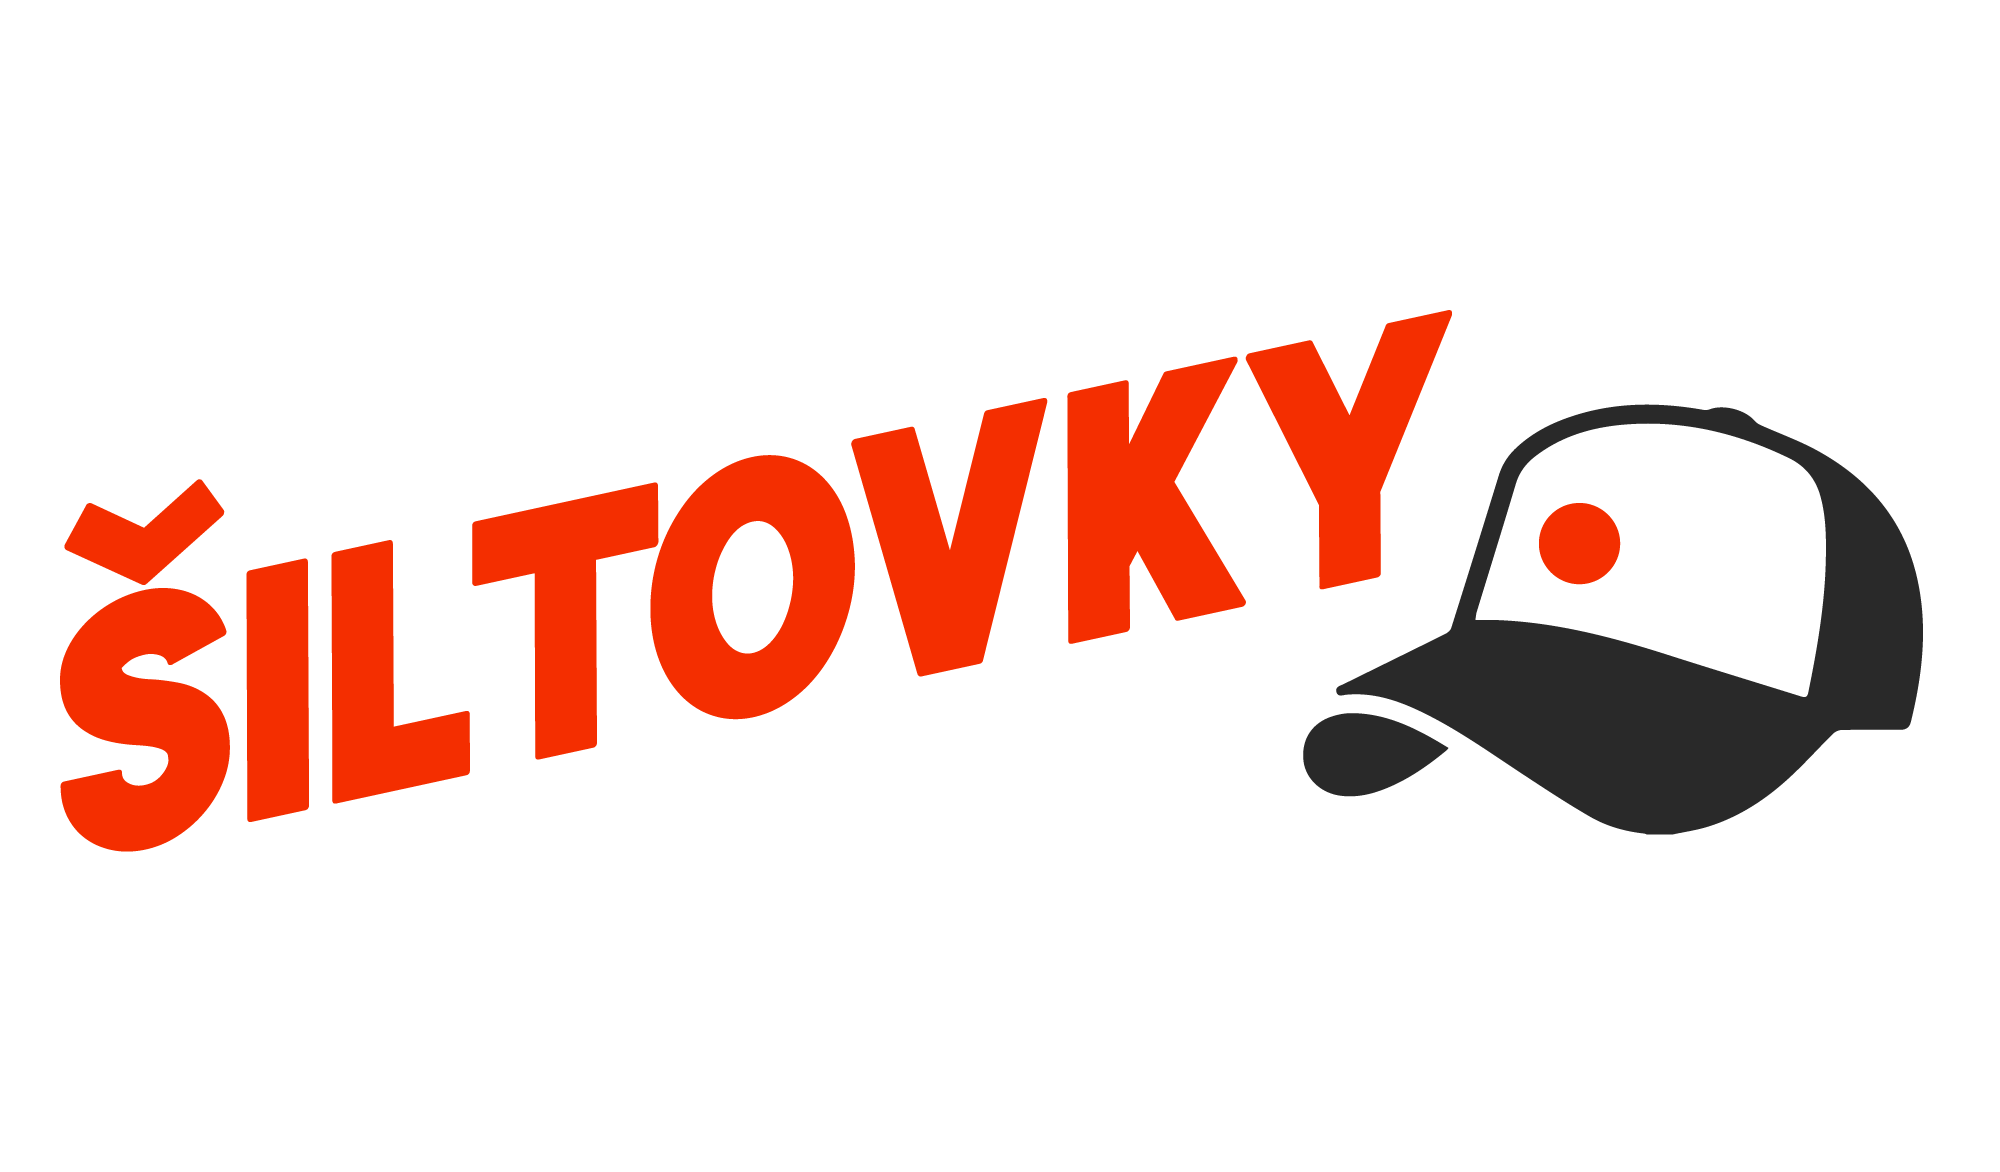 cropped siltovky logo